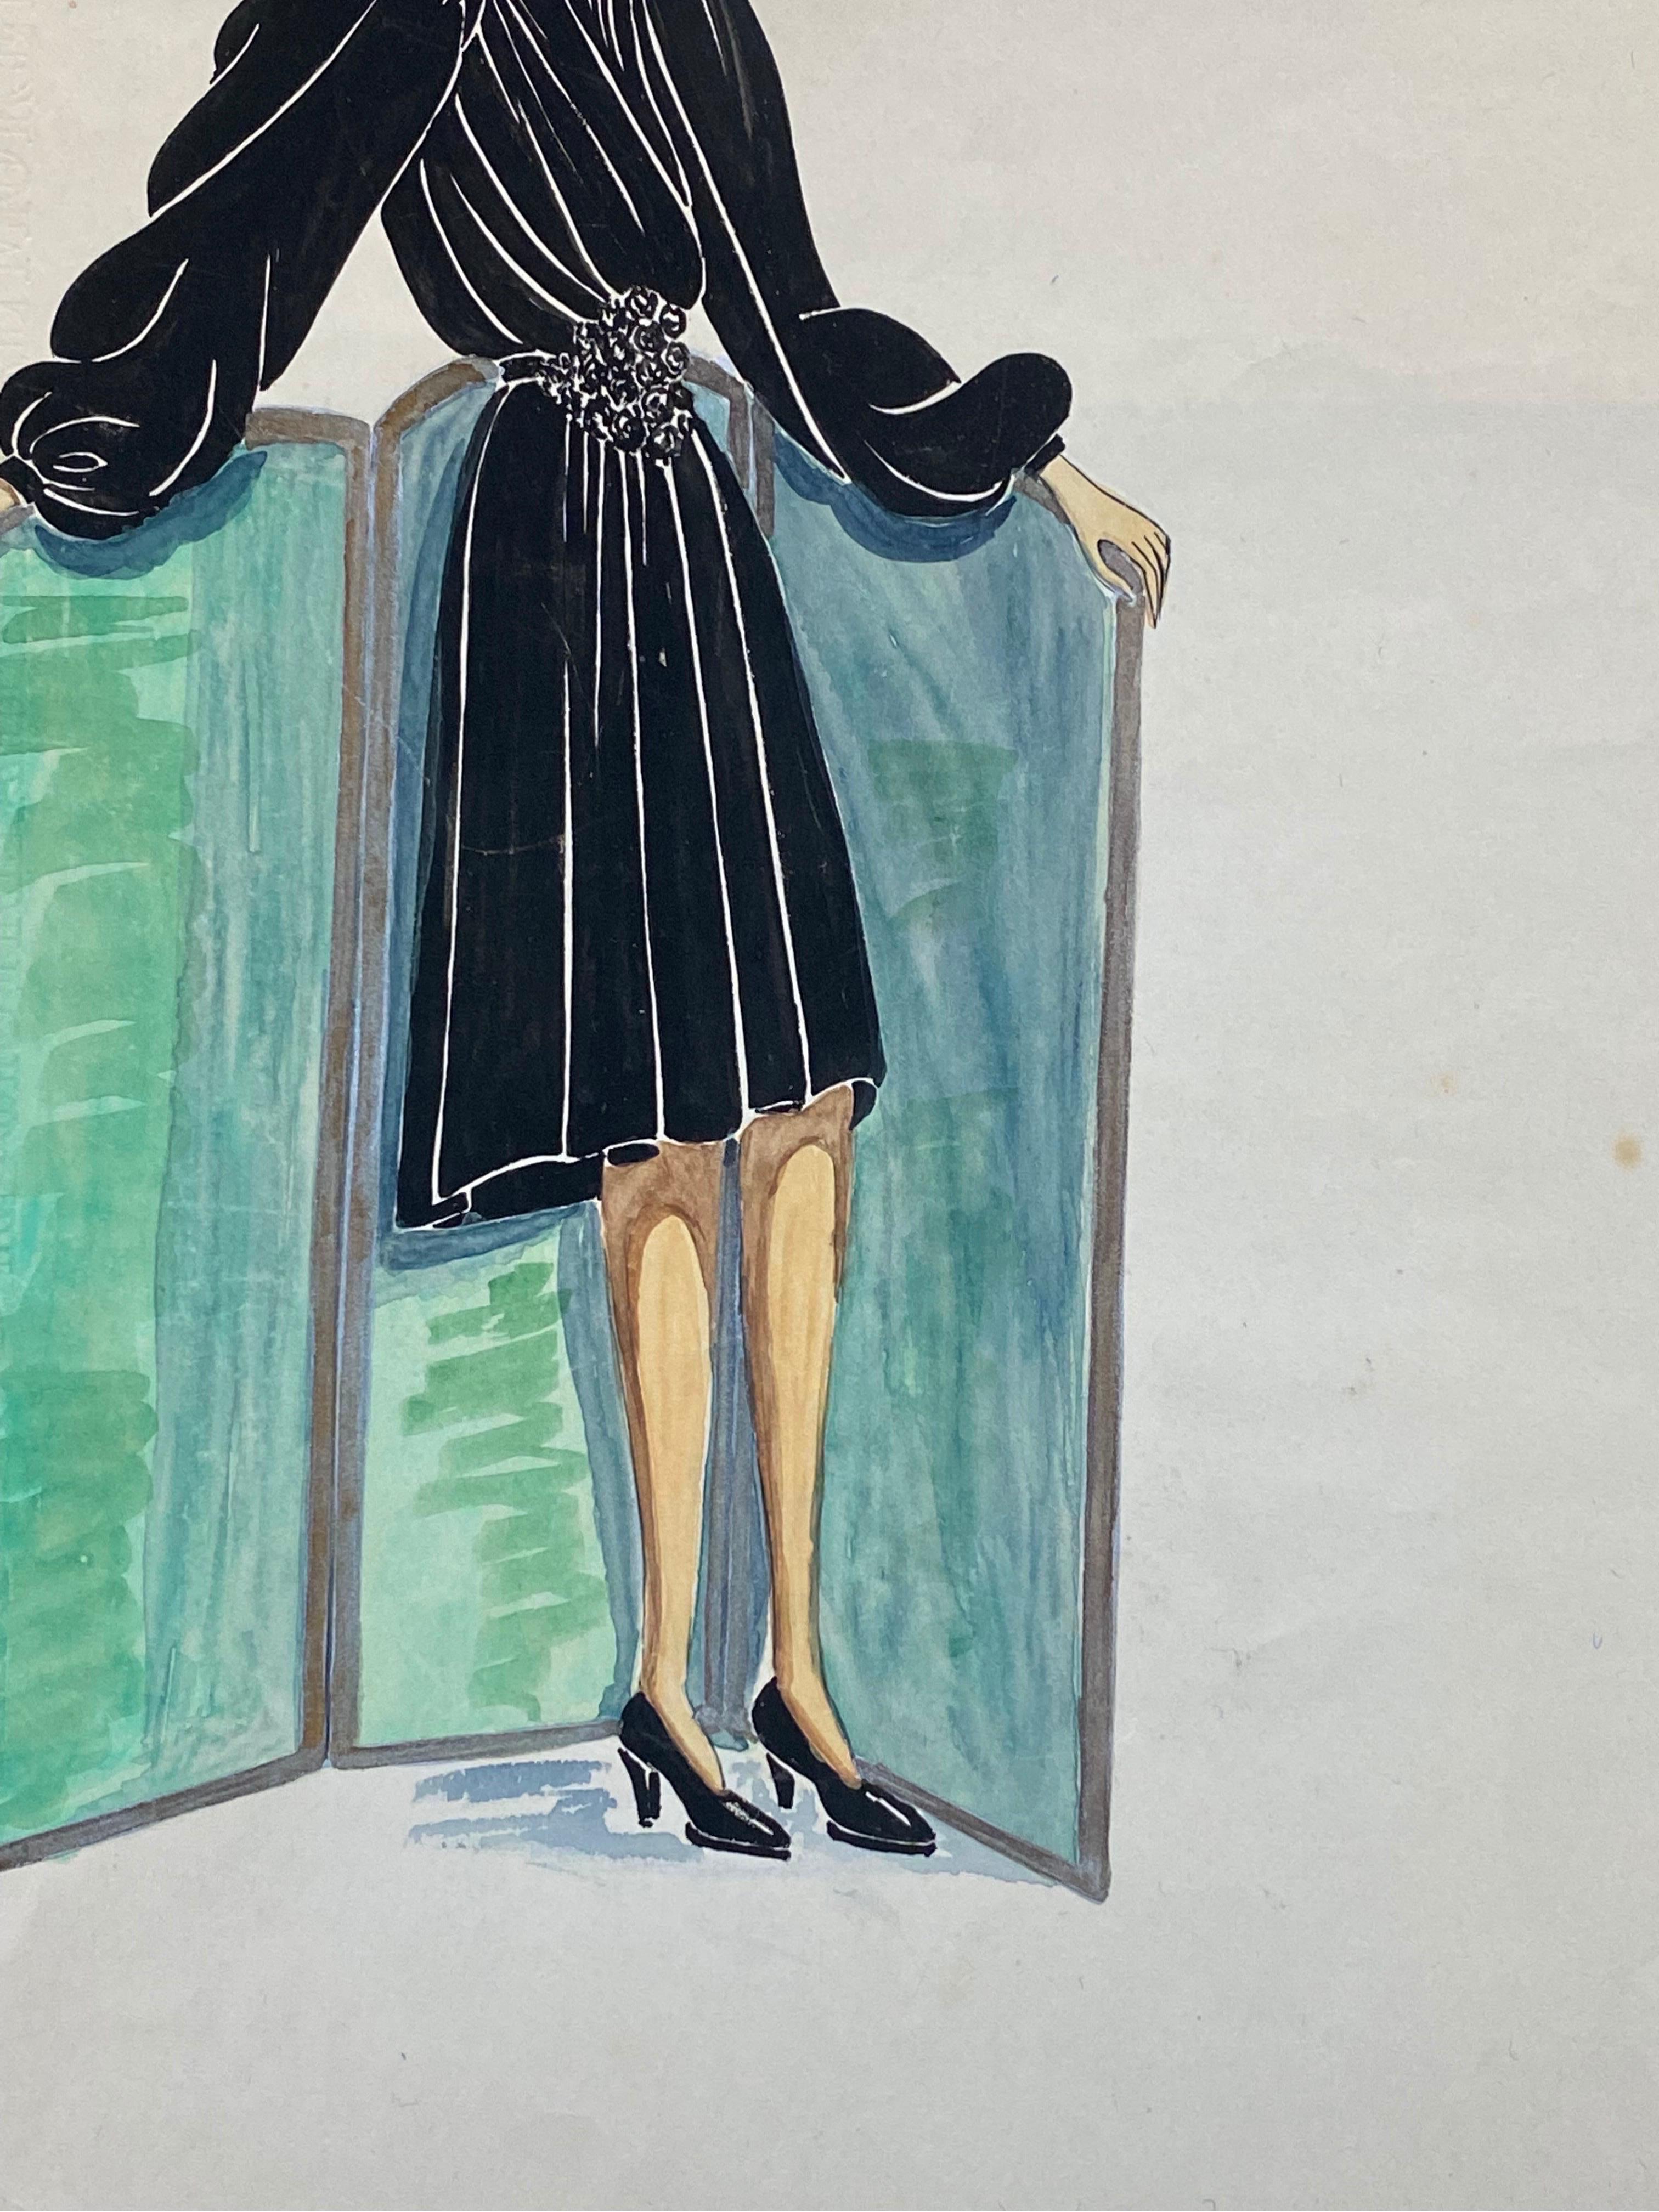 1940's Fashion Illustration - Chanel Styled Woman In Chic Black Dress - Impressionist Painting by Geneviève Thomas